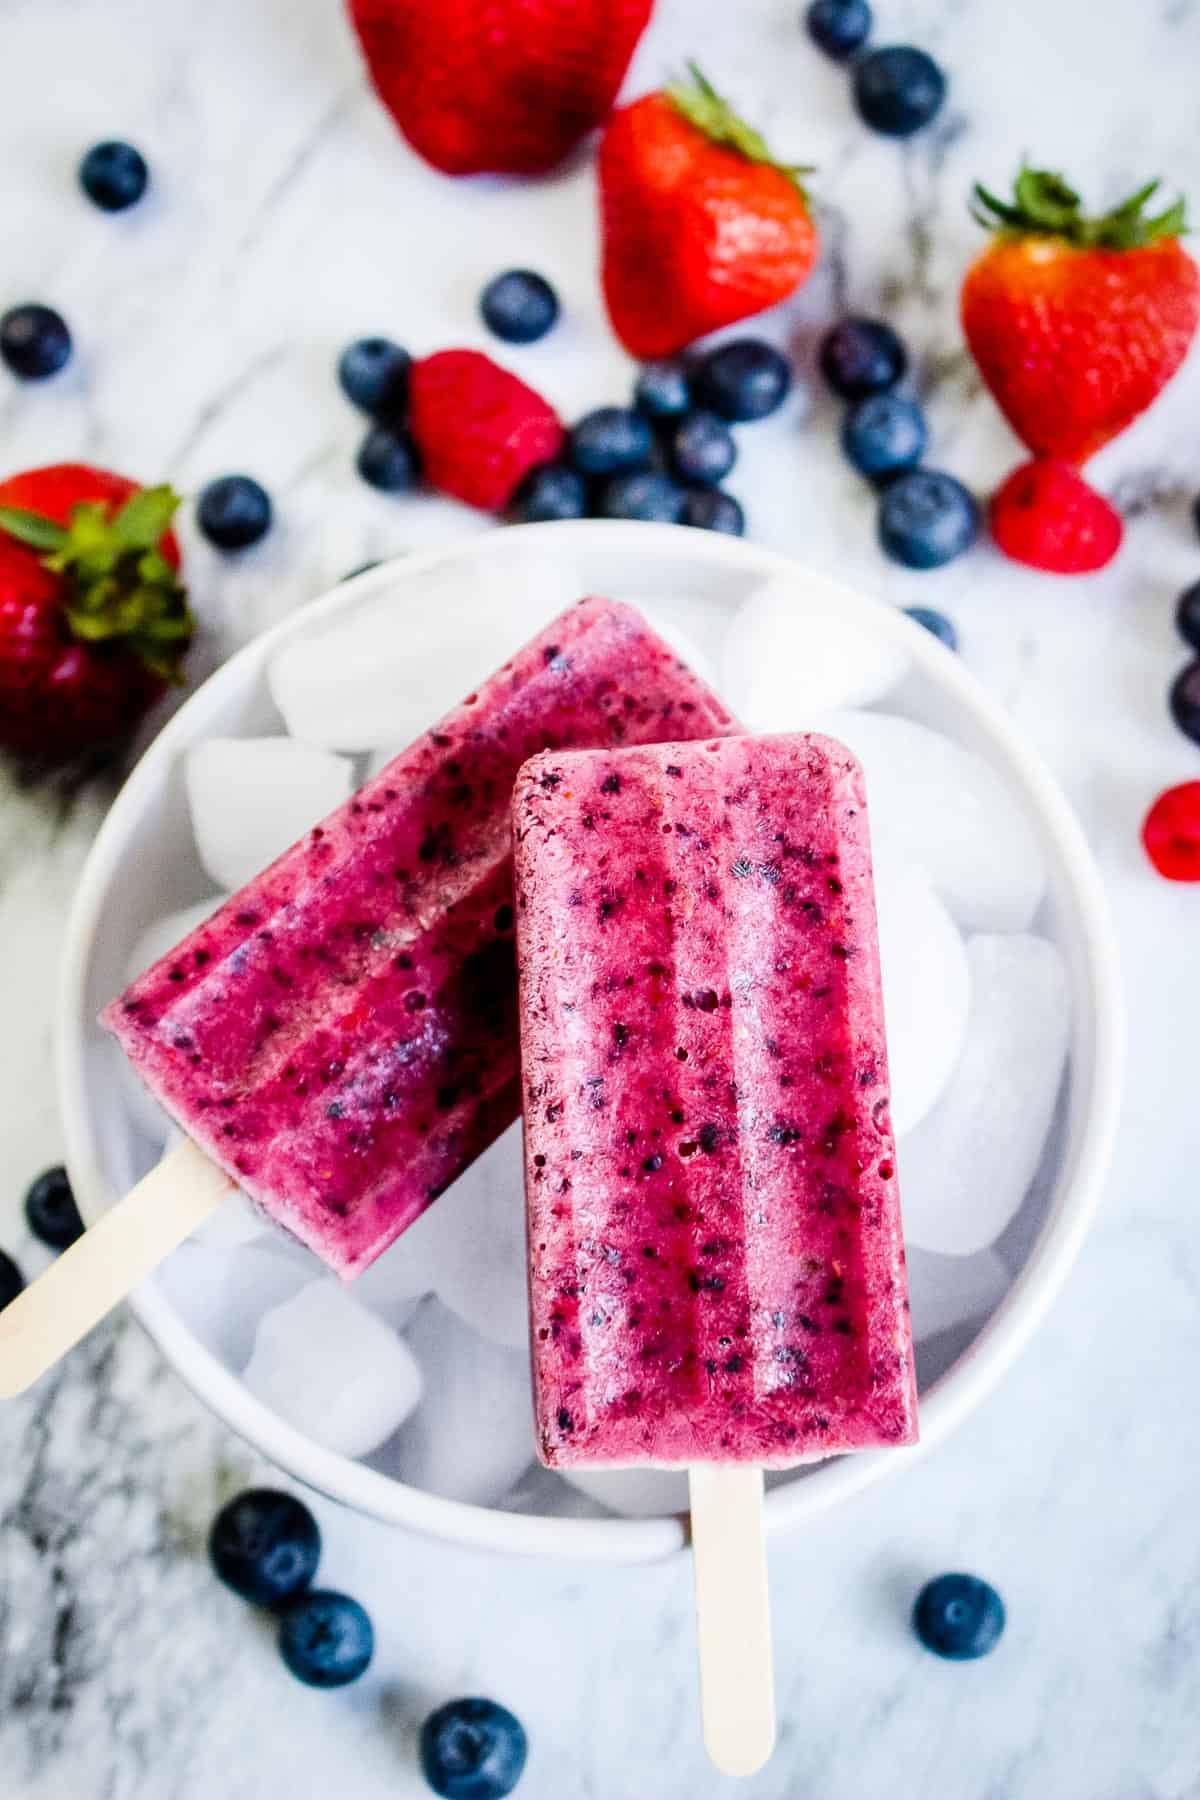 Photo of two Completed Berry Popsicles on a Bowl of Ice